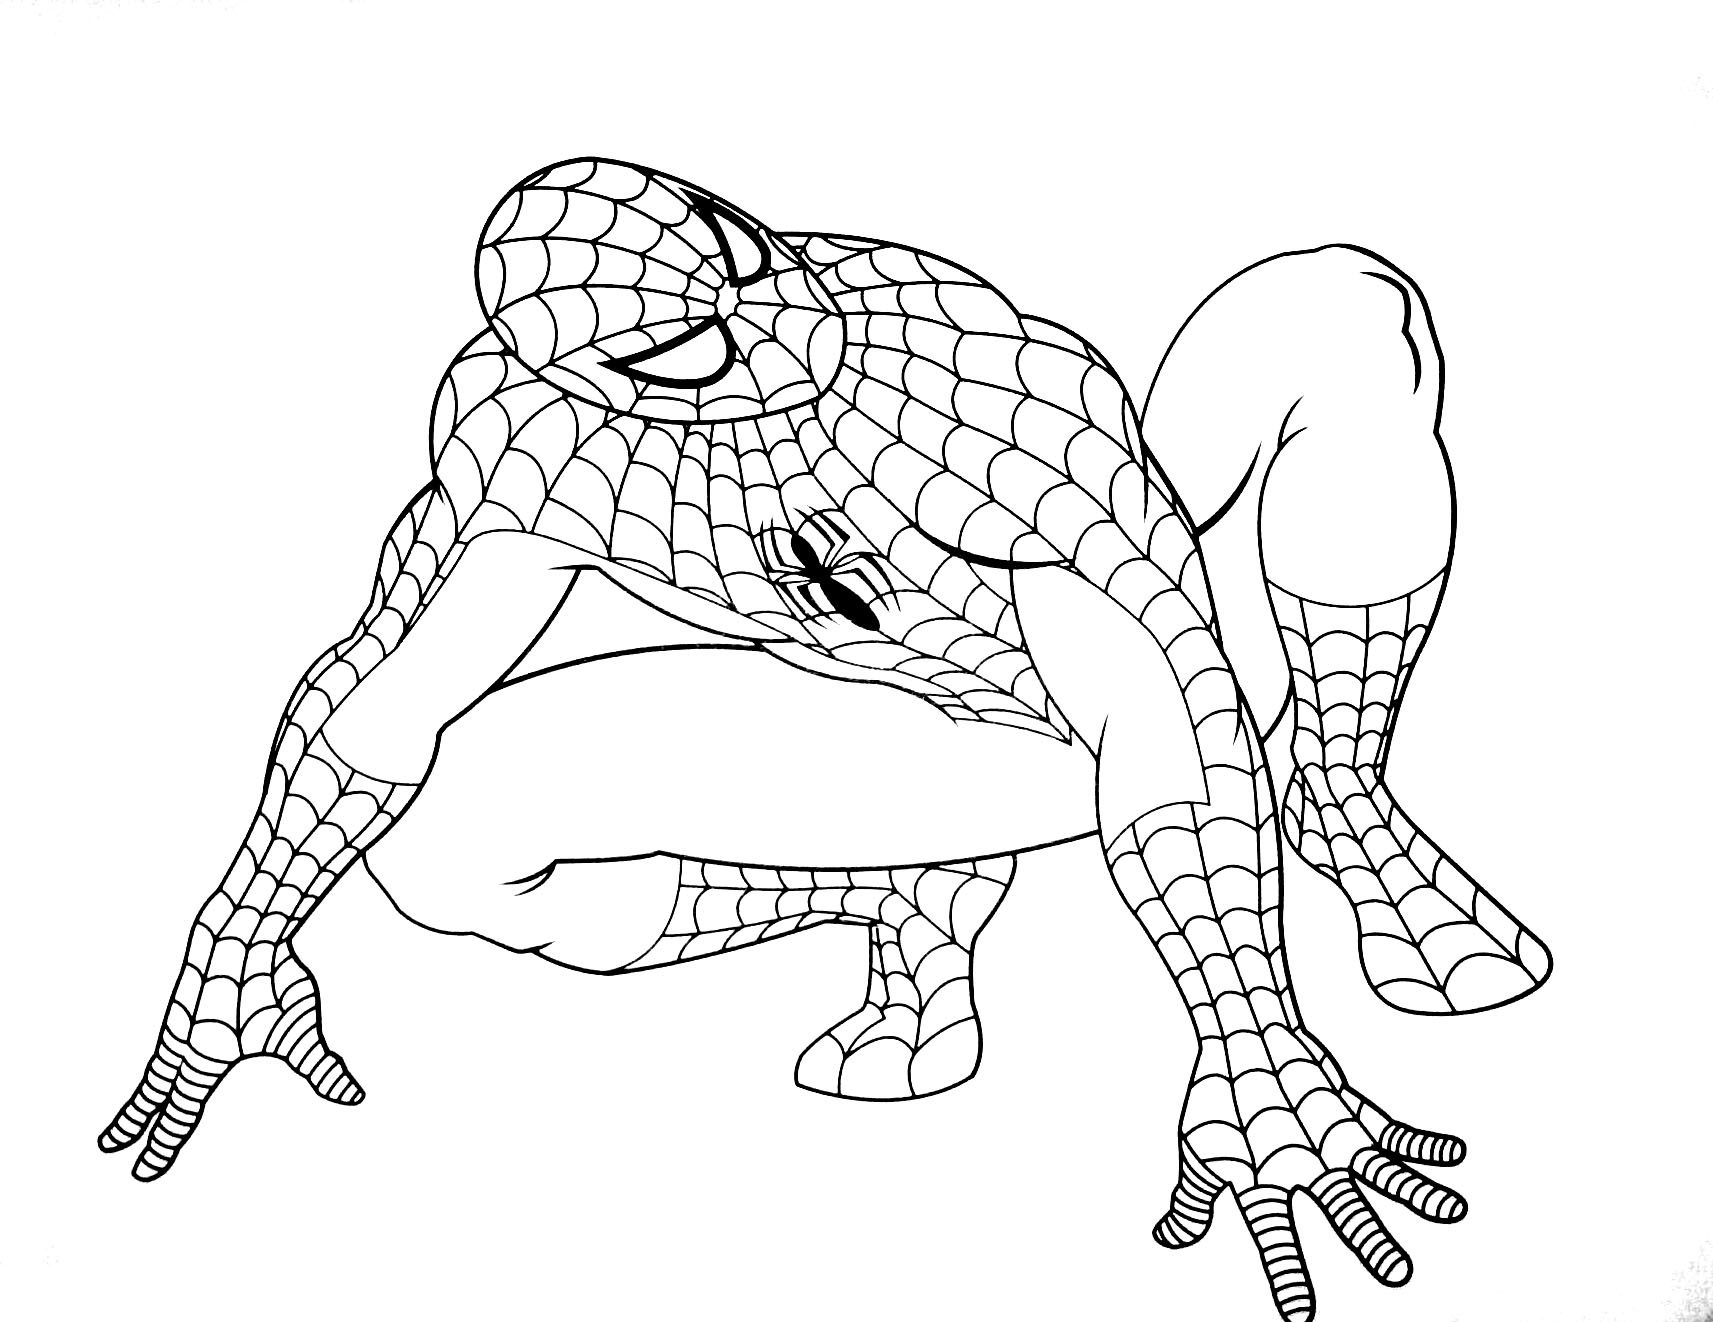 Coloring for kids spiderman is simple